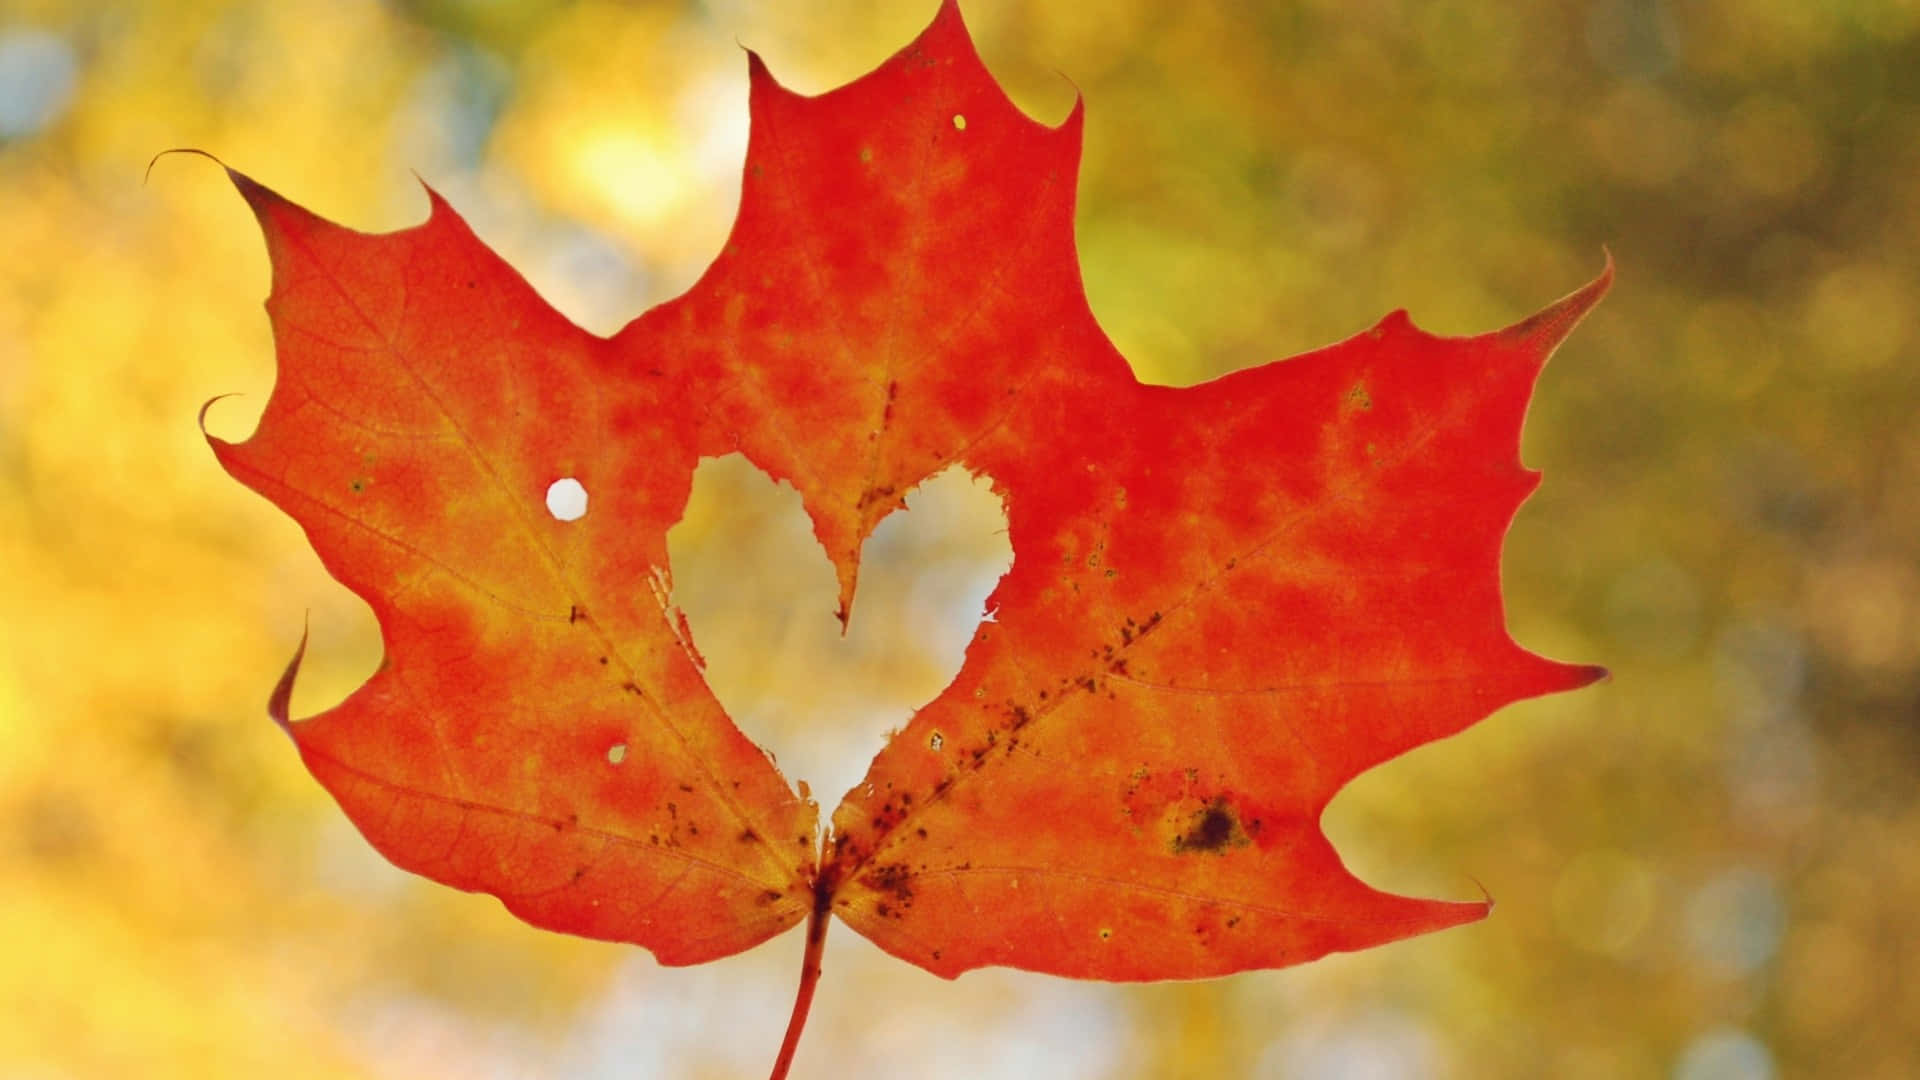 The vibrant changing colors of a crisp Canadian Maple Leaf.